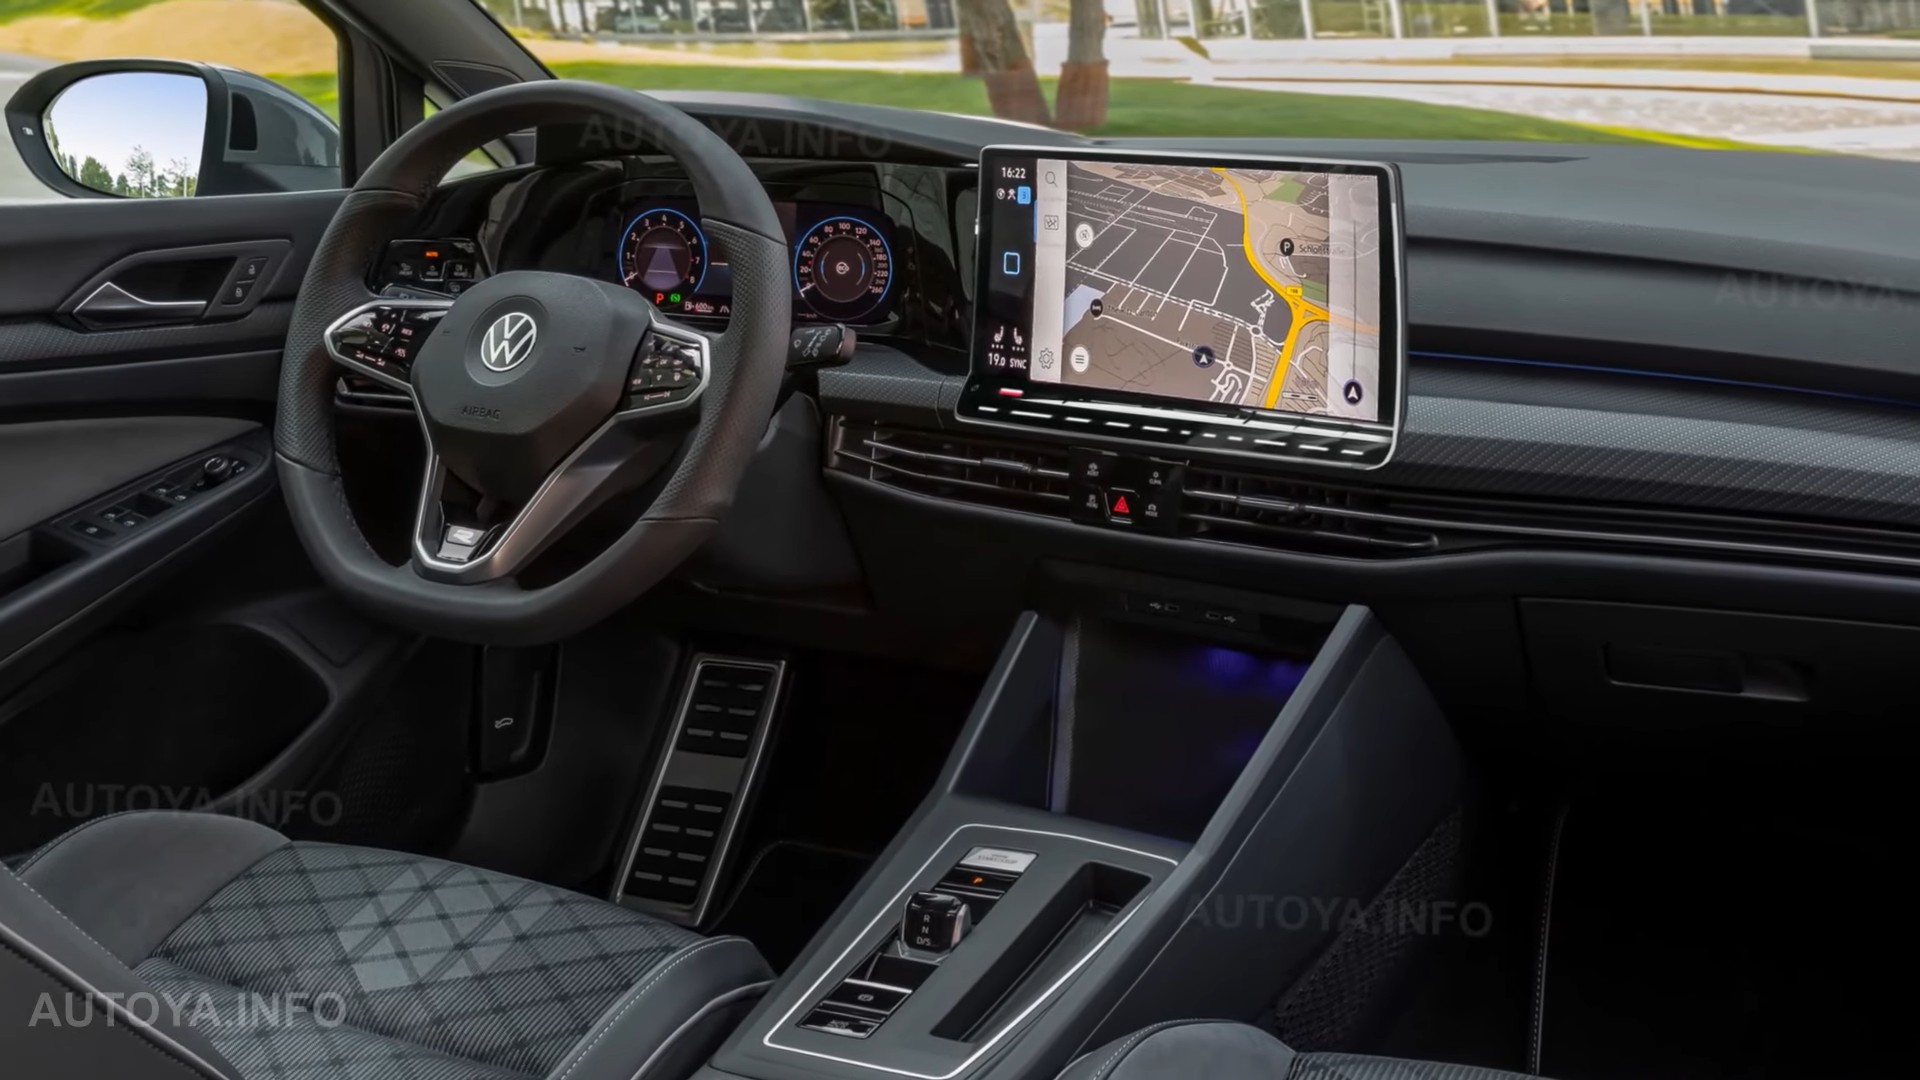 Do you like touchscreens in cars? On the road